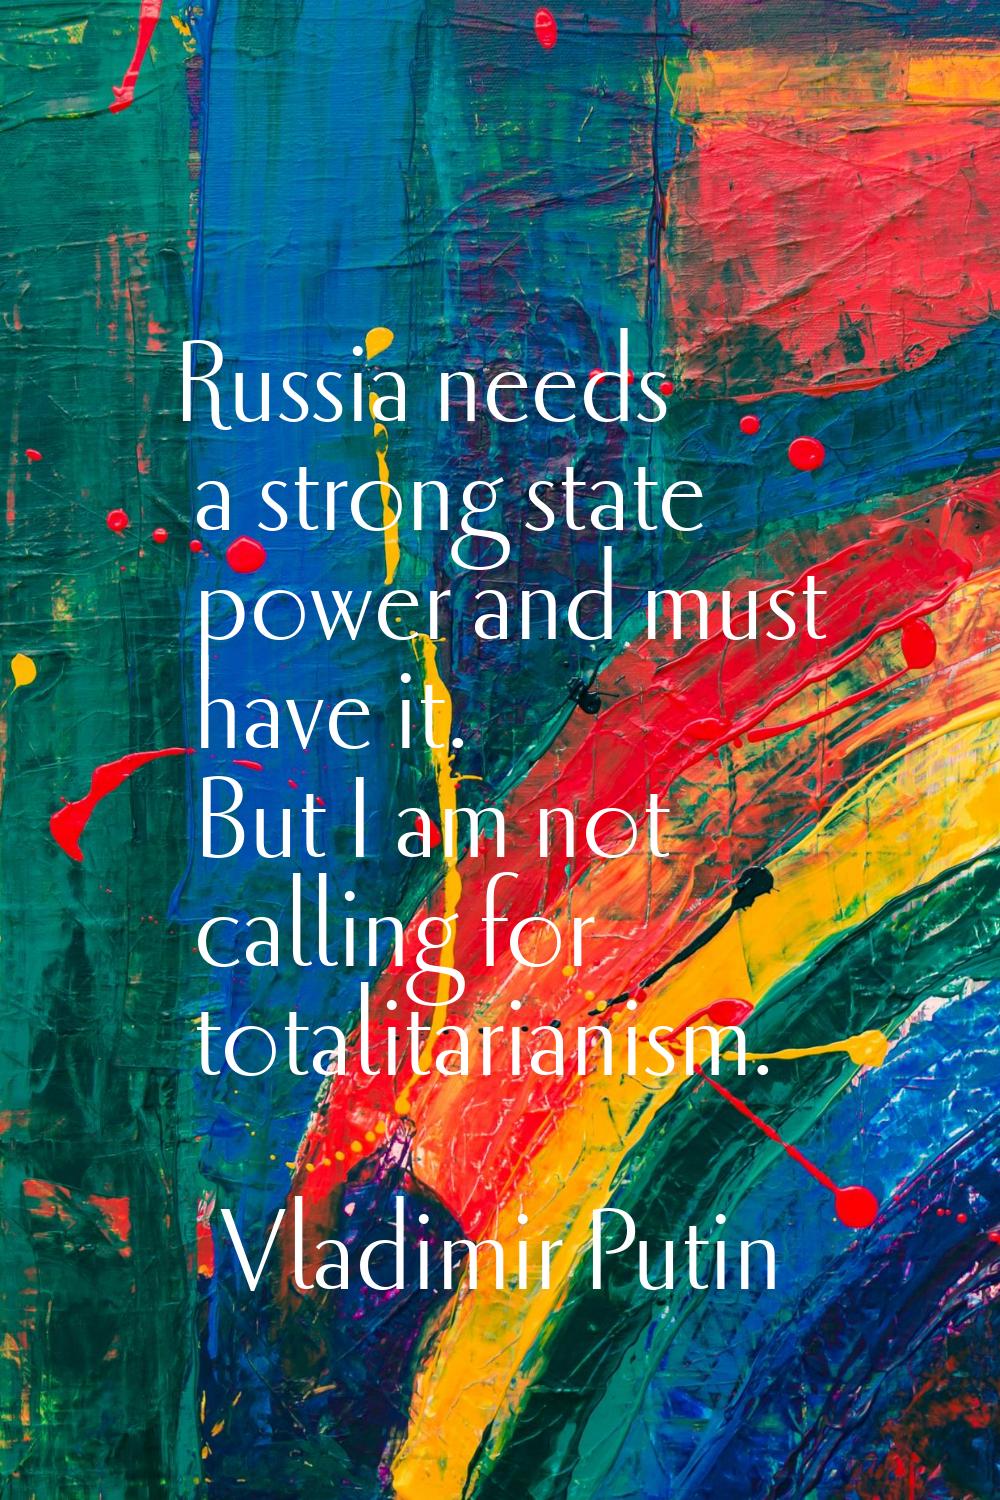 Russia needs a strong state power and must have it. But I am not calling for totalitarianism.